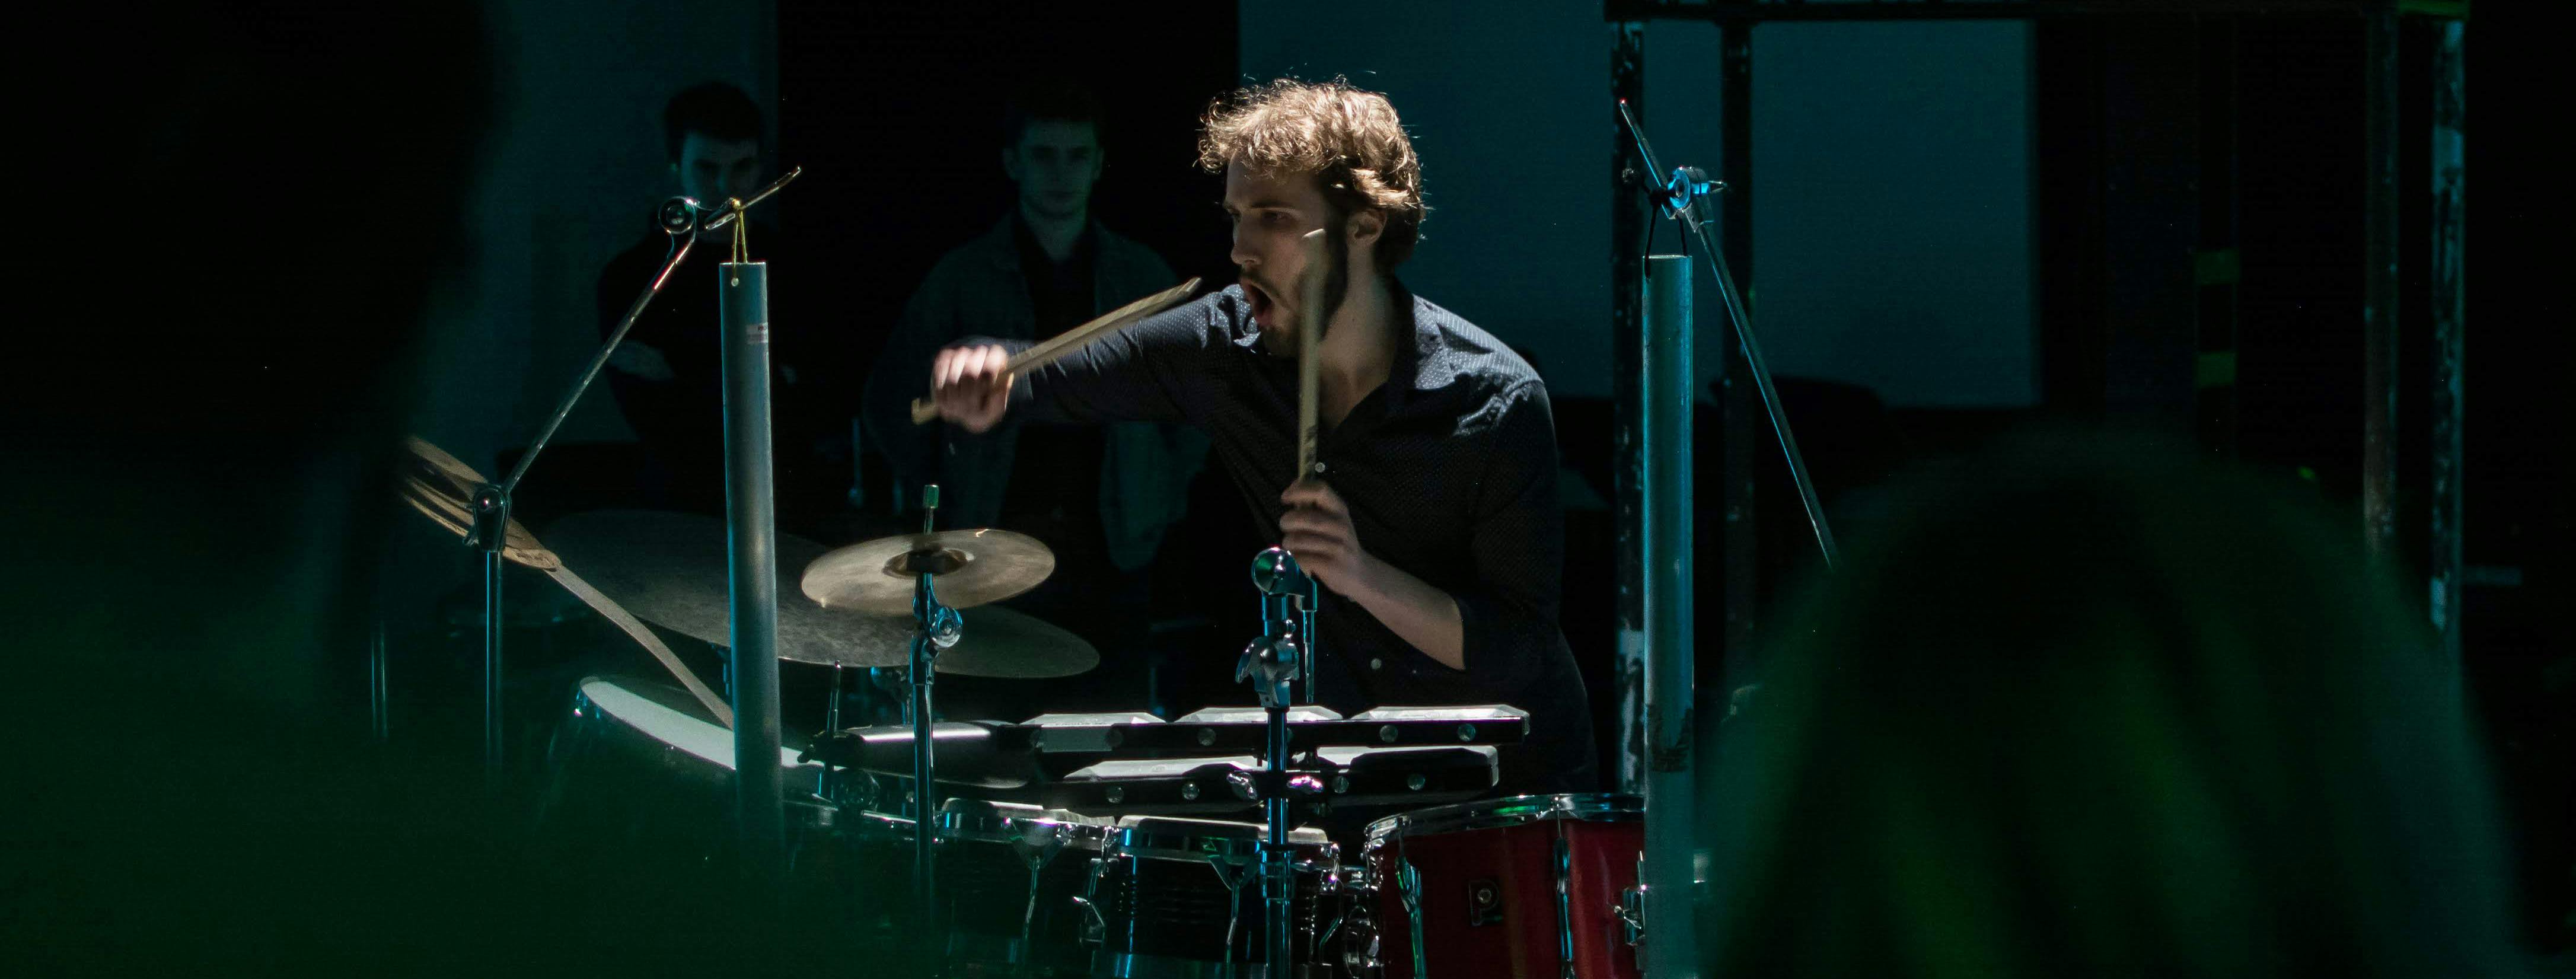 BMus student Andrew Woolcock performing at Centrala. Photo Alex Henshaw. Student playing drums in dark venue